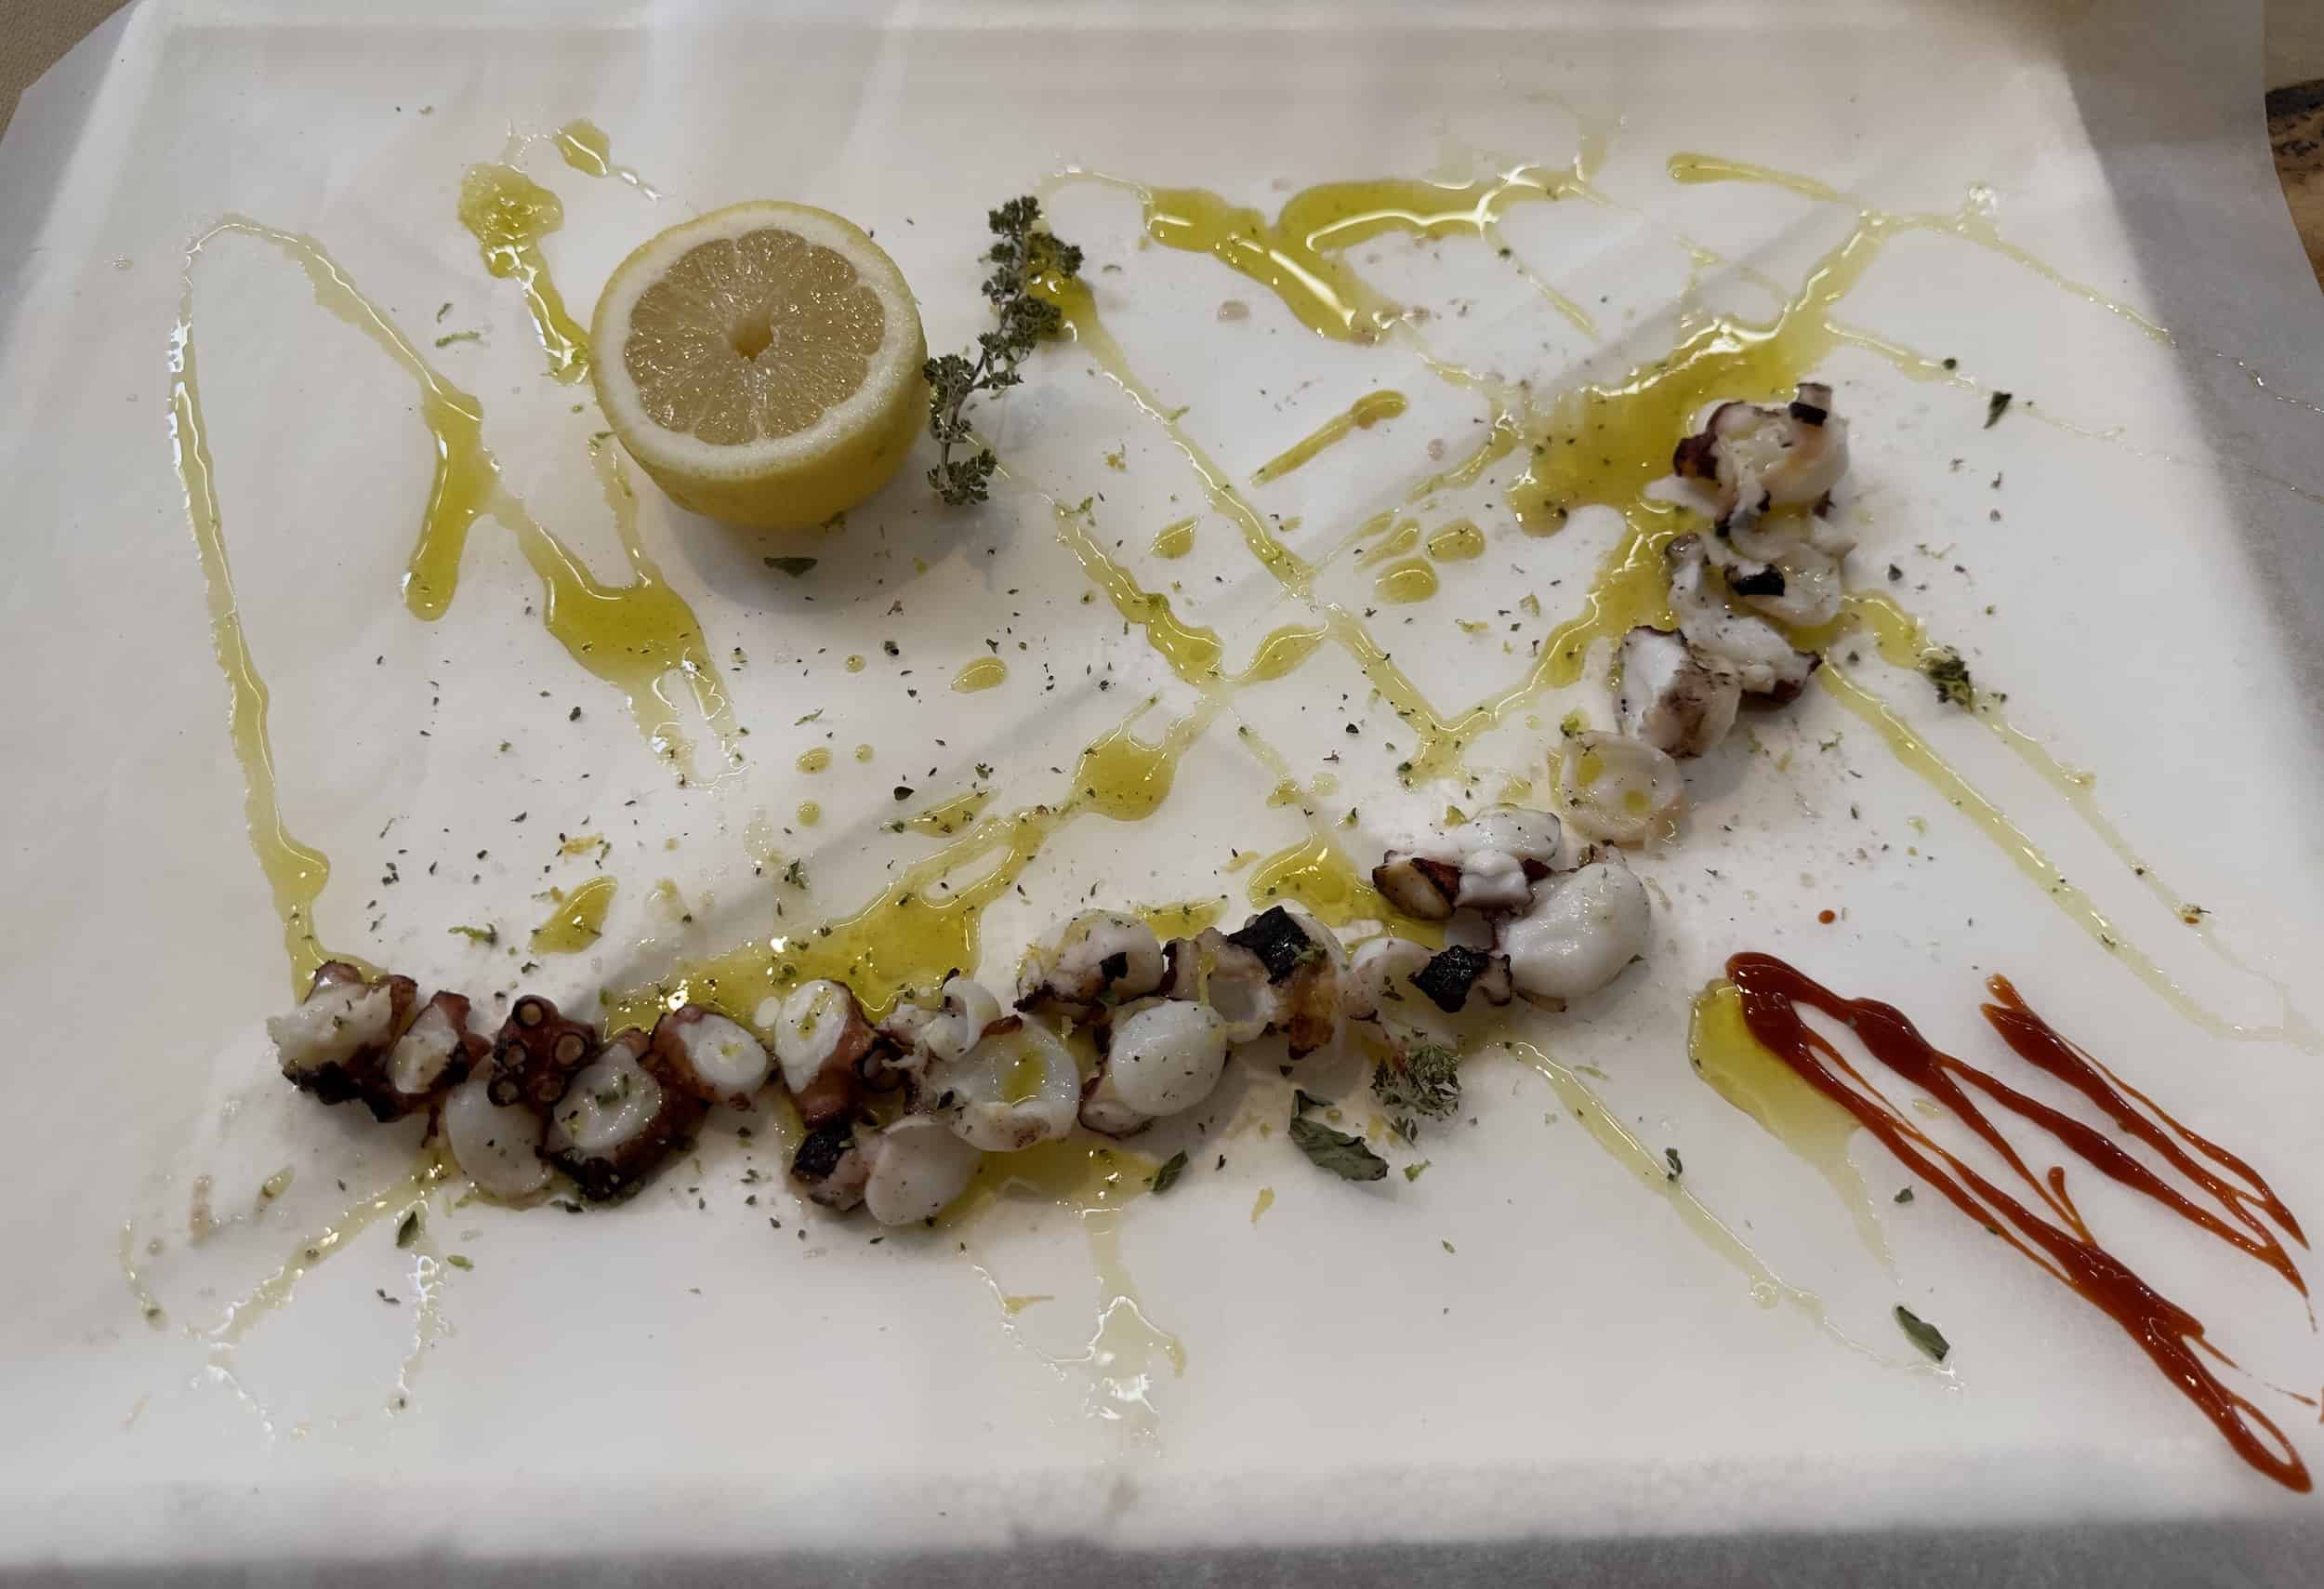 Octopus at Hasapika in Athens, Greece